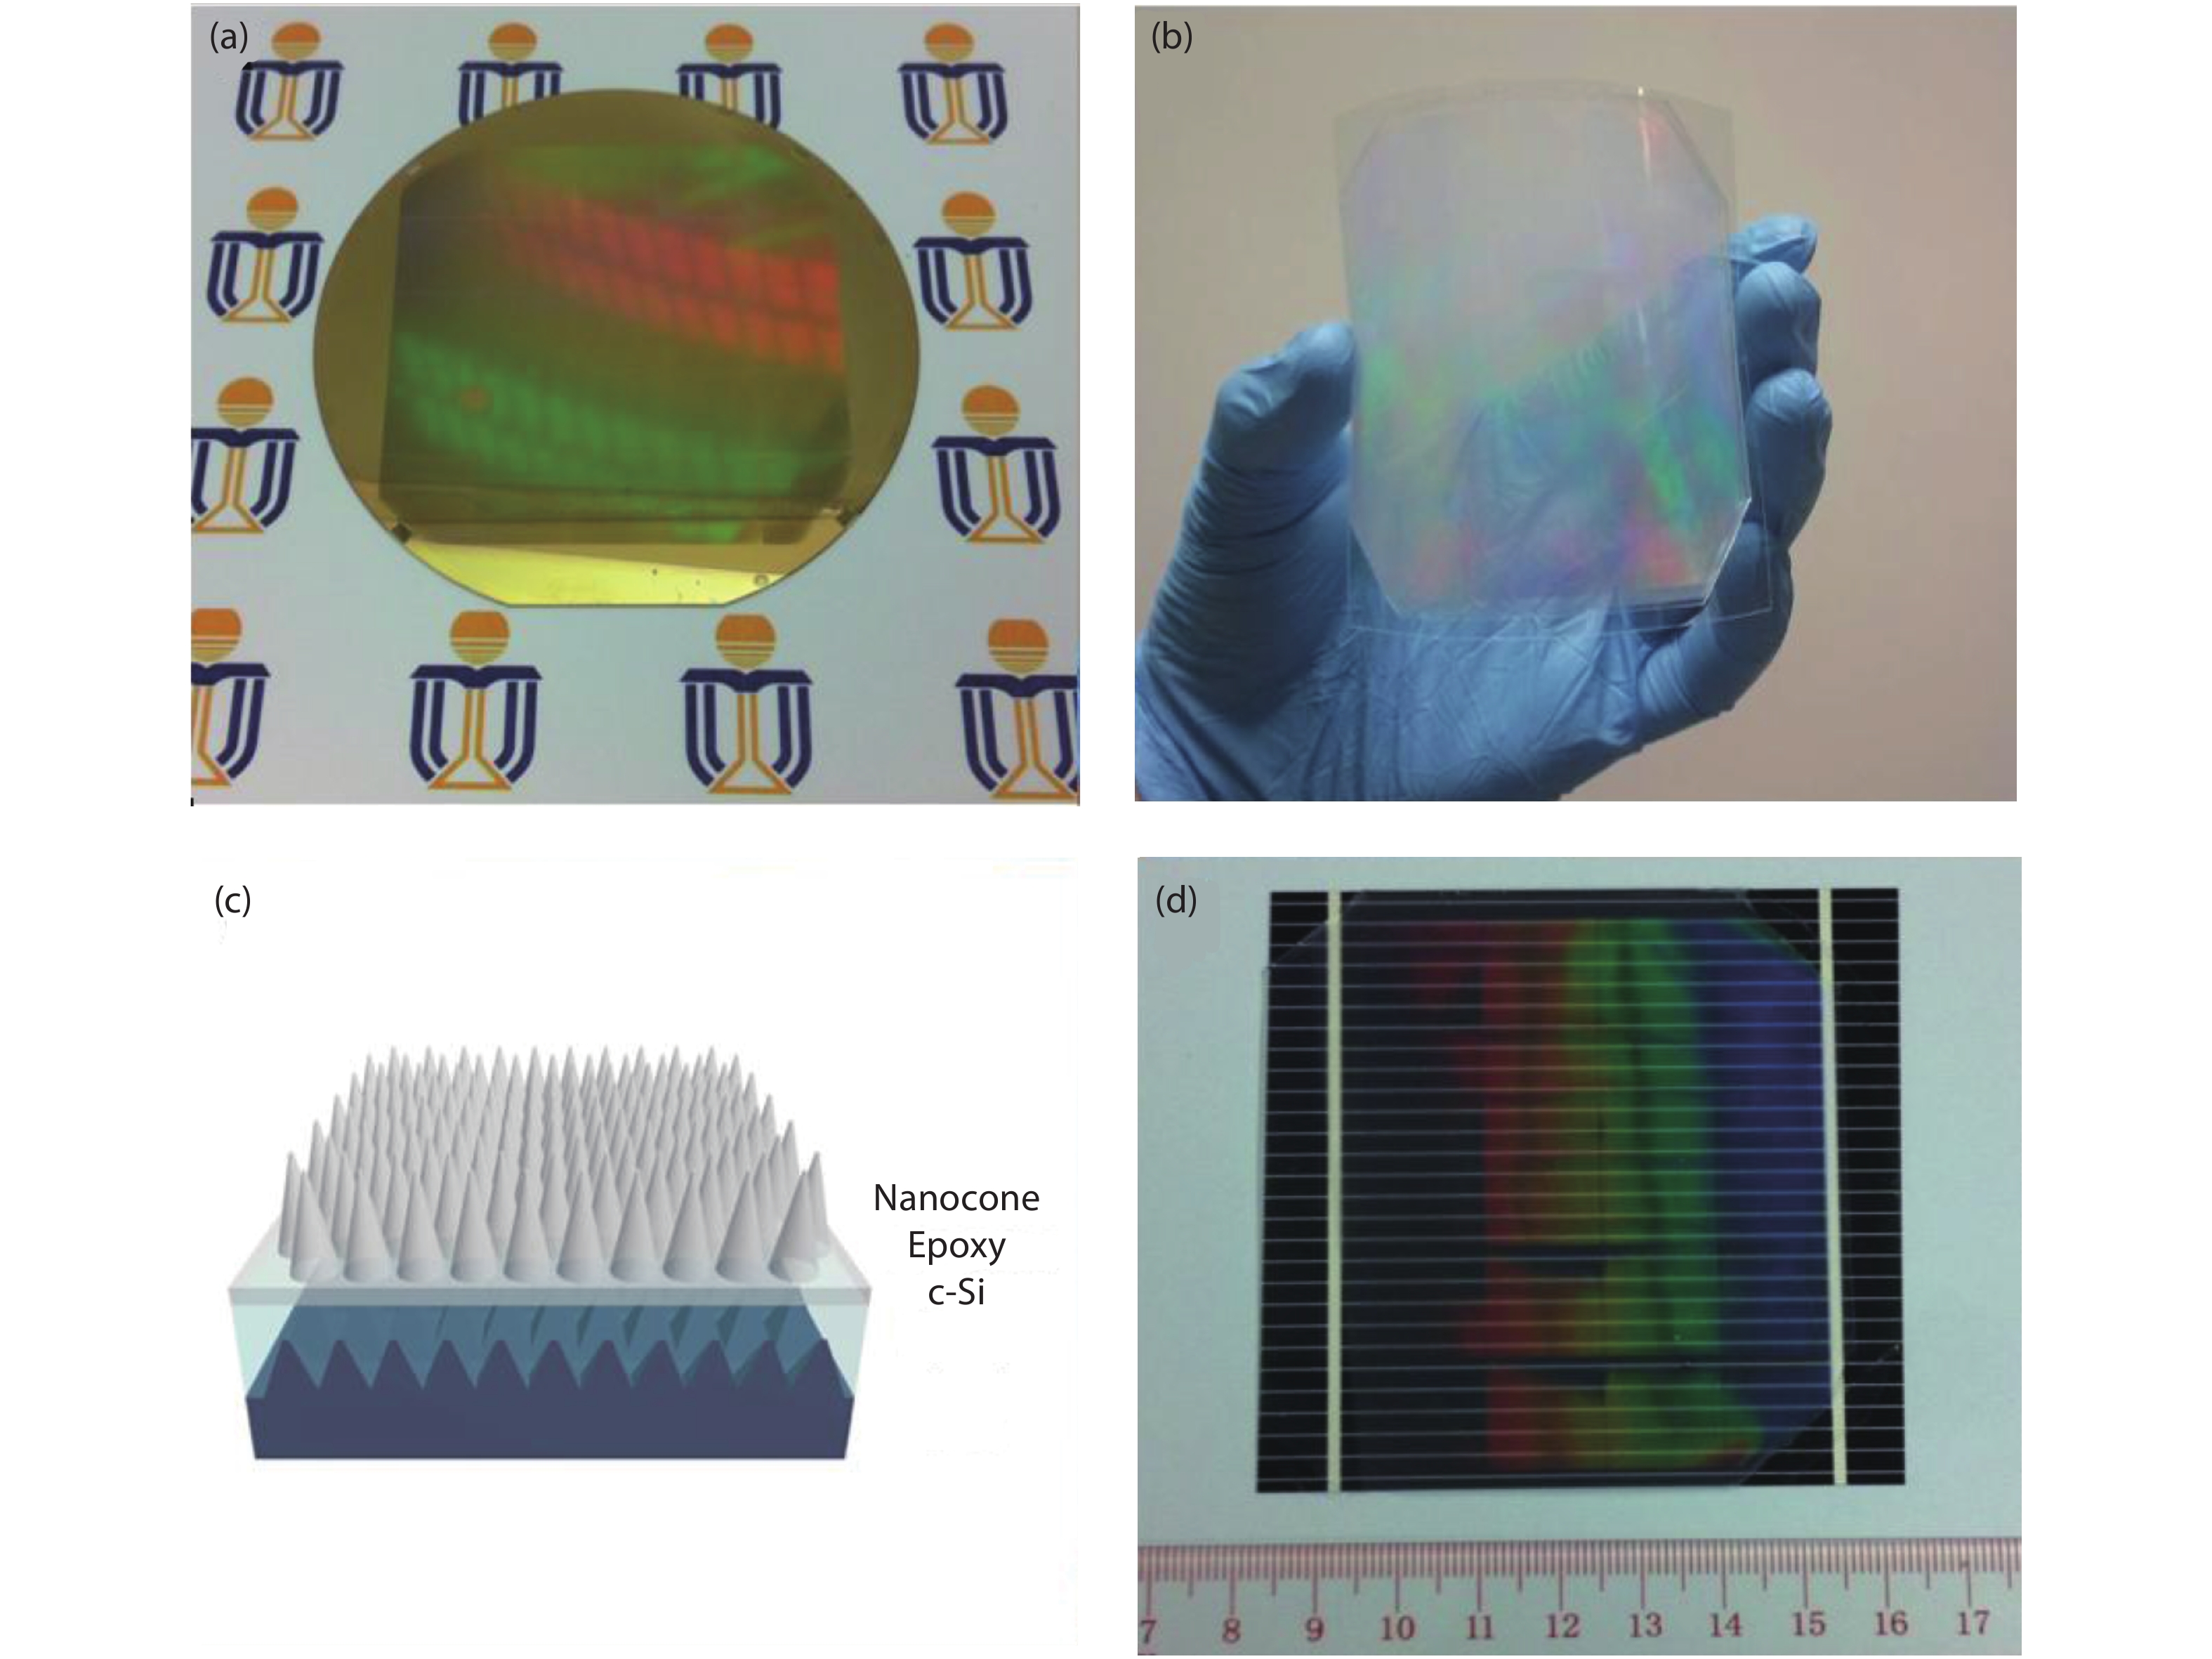 (Color online) (a) The photograph of 4-inch Au-coated mold. (b) The photograph of flexible AR film attached on polycarbonate film. (c) Schematic diagram of the c-Si solar cell device with nanocone AR film attached on the top. (d) Real 8 cm by 8 cm AR film attached on c-Si device.